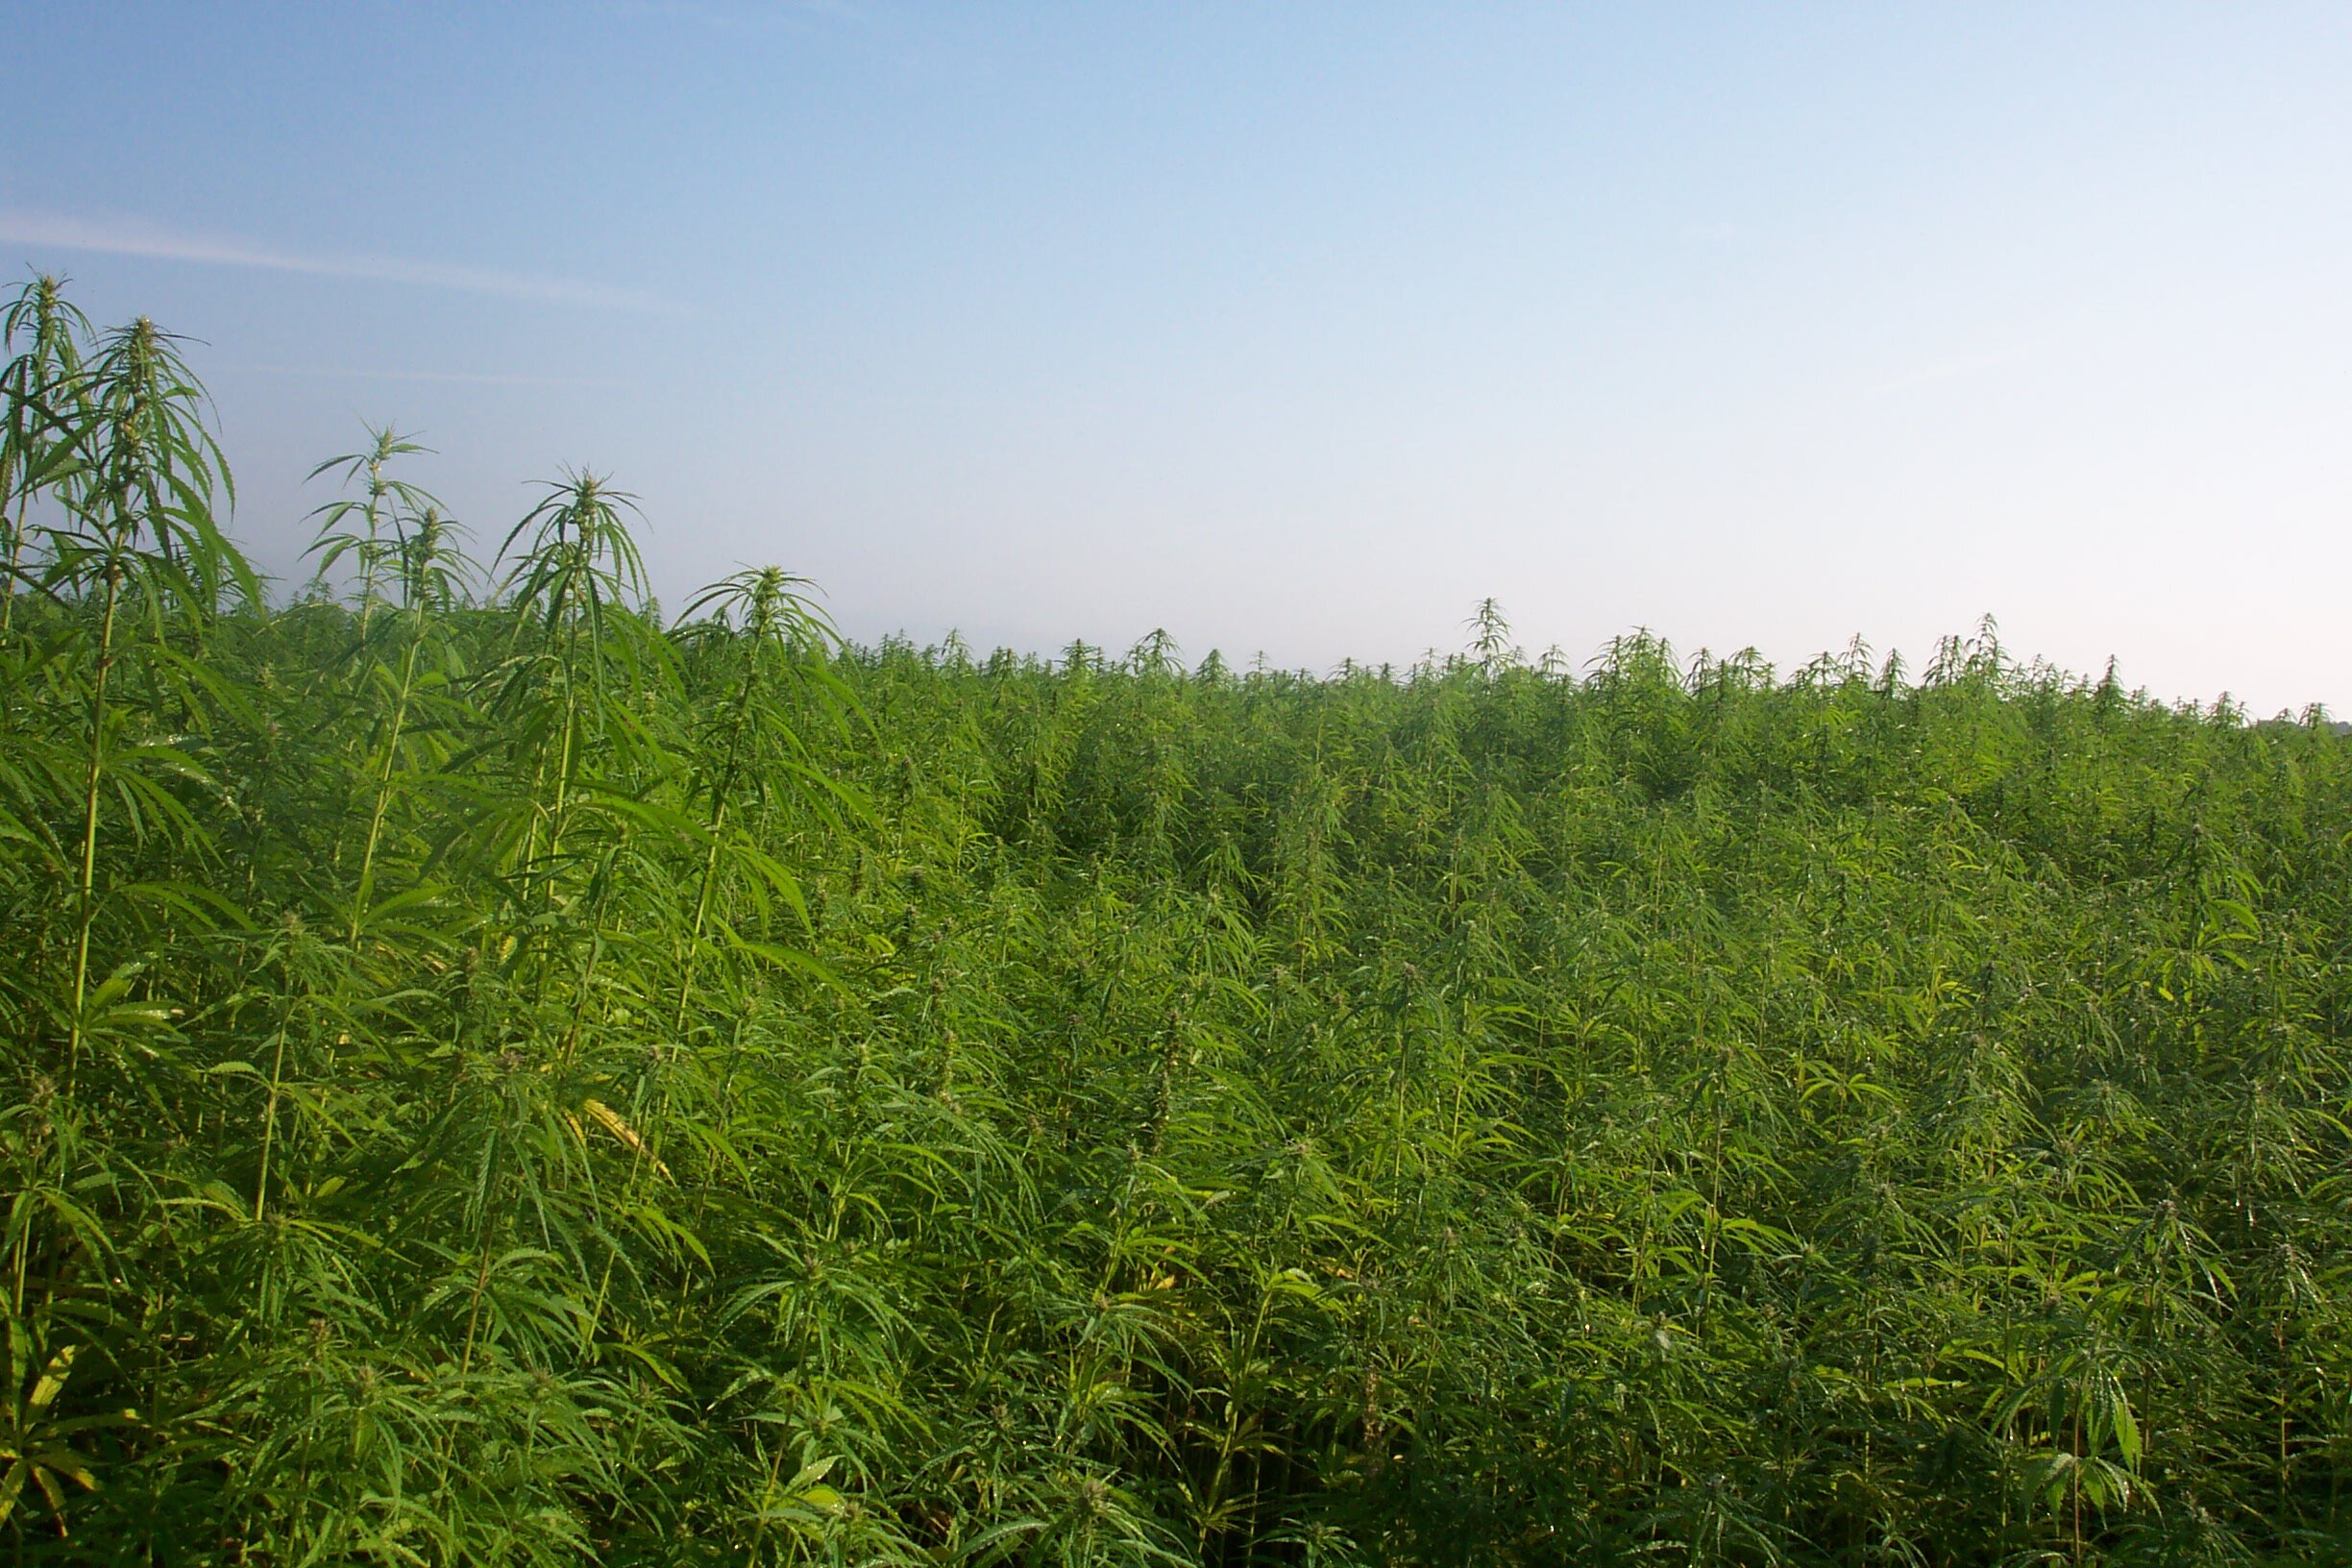 When It Comes To Hemp, Maryland Is Somewhat ‘Open For Business’